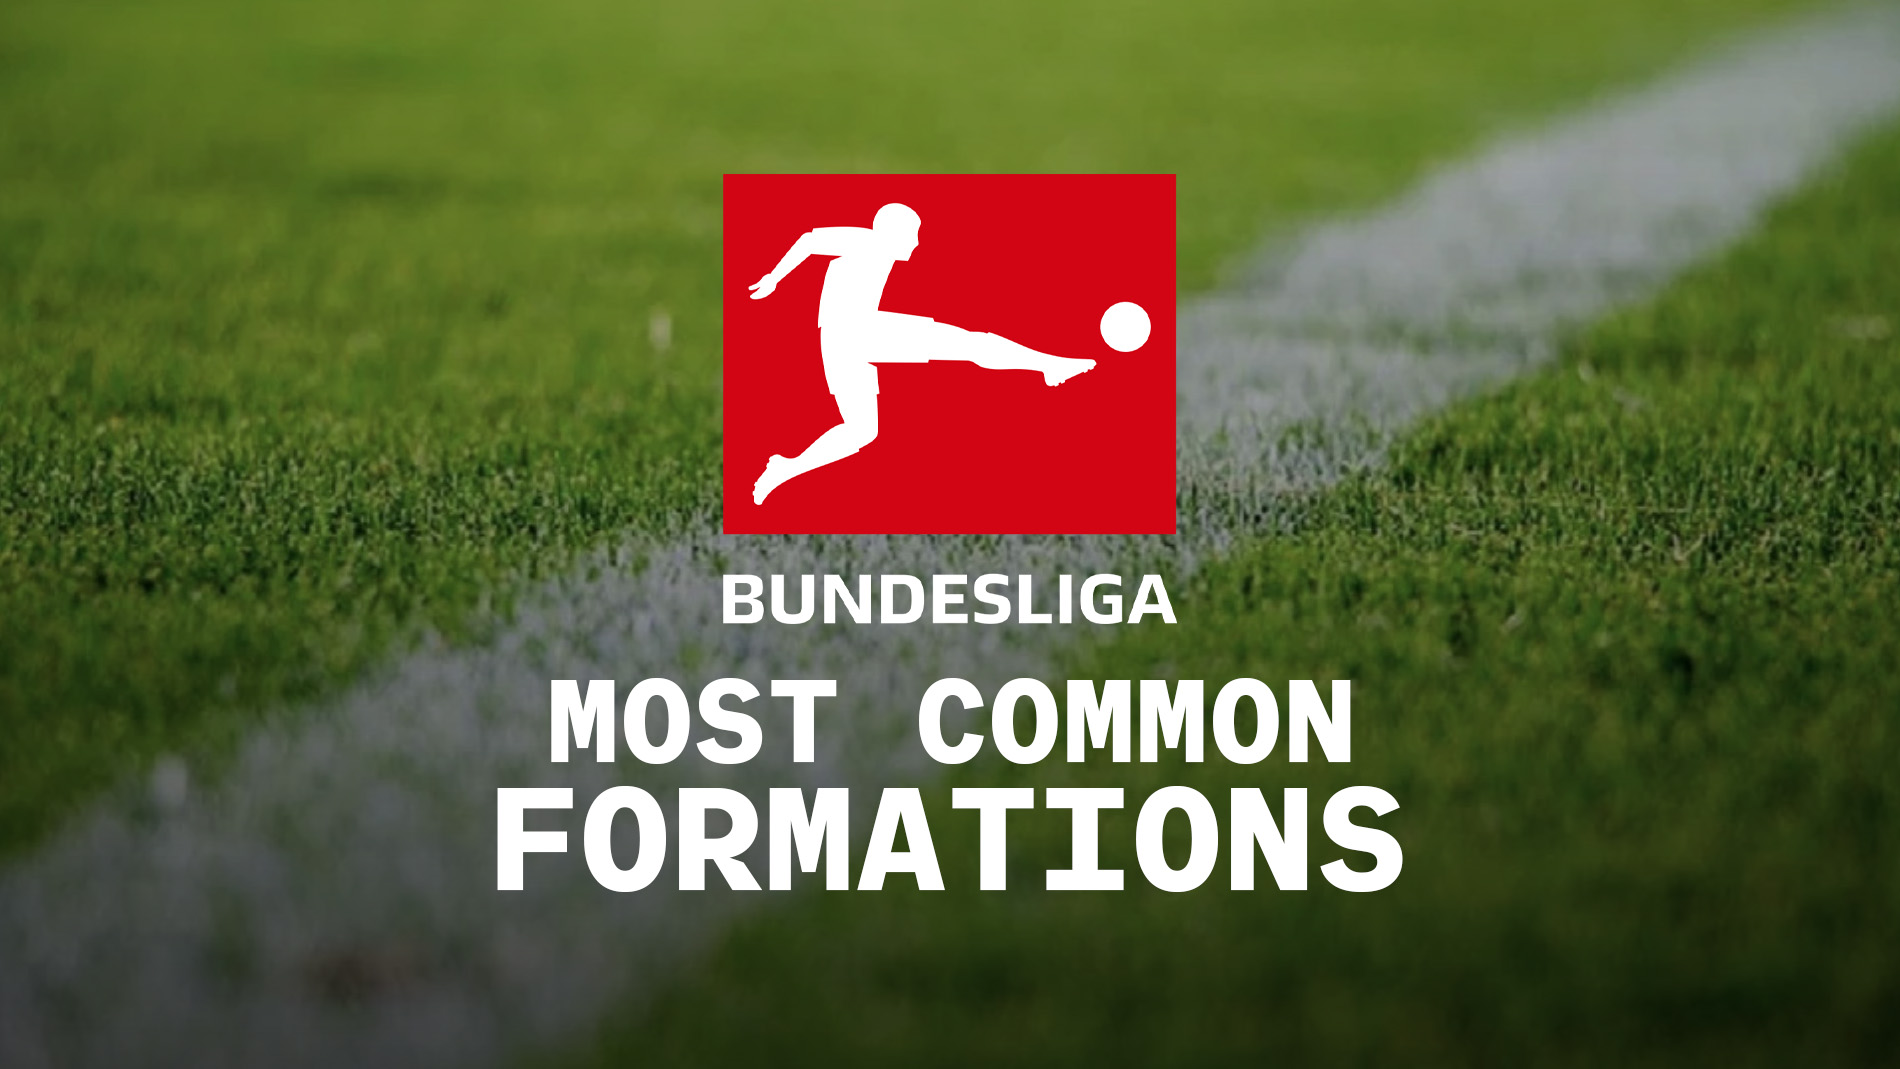 The most common and recommended formation in Bundesliga.